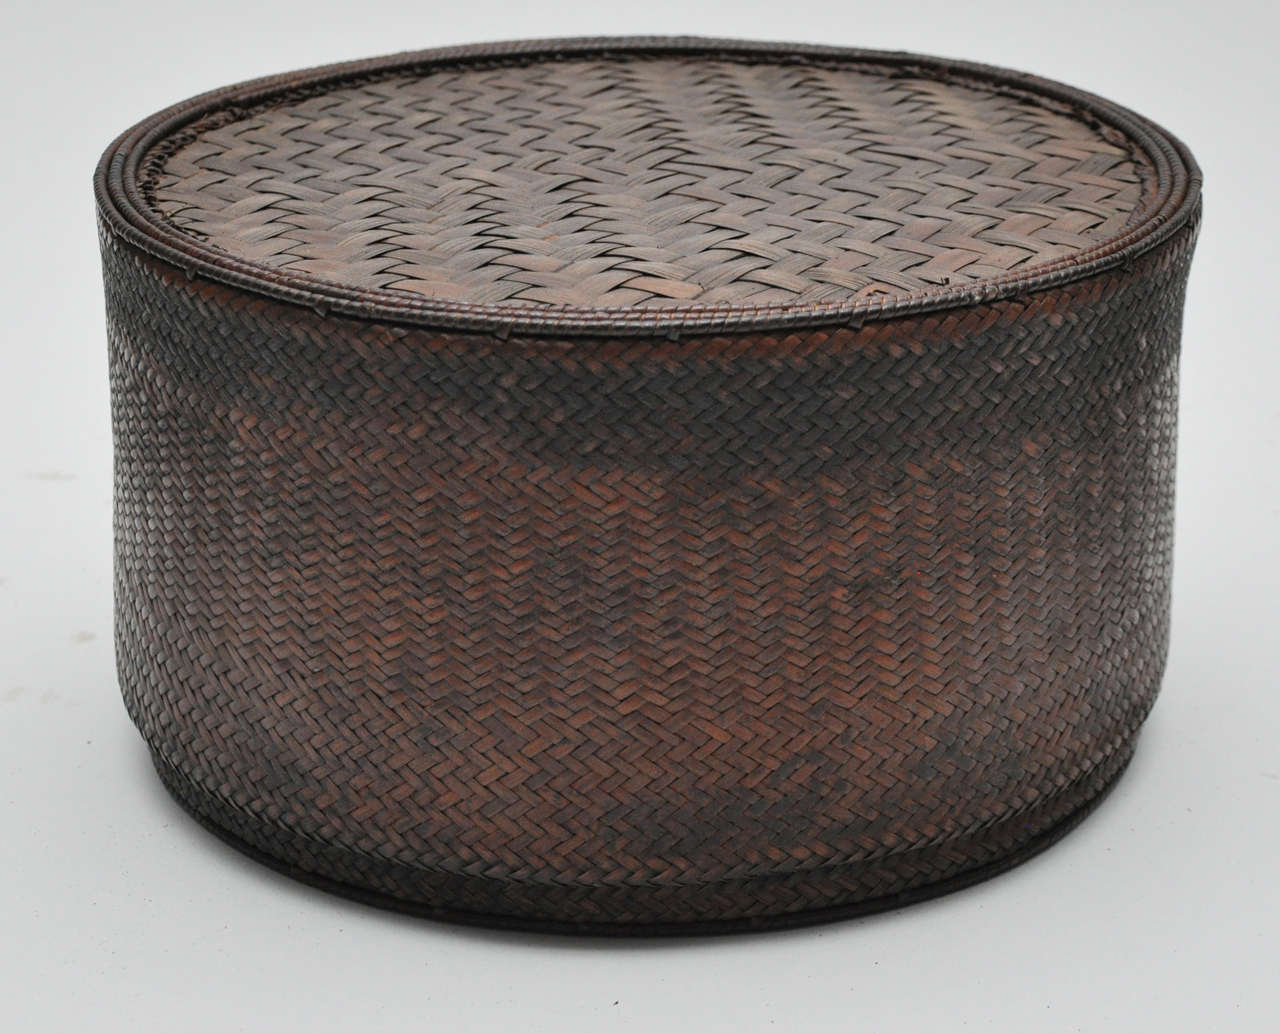 Late 20th Century Trio of Woven African Basket/Containers